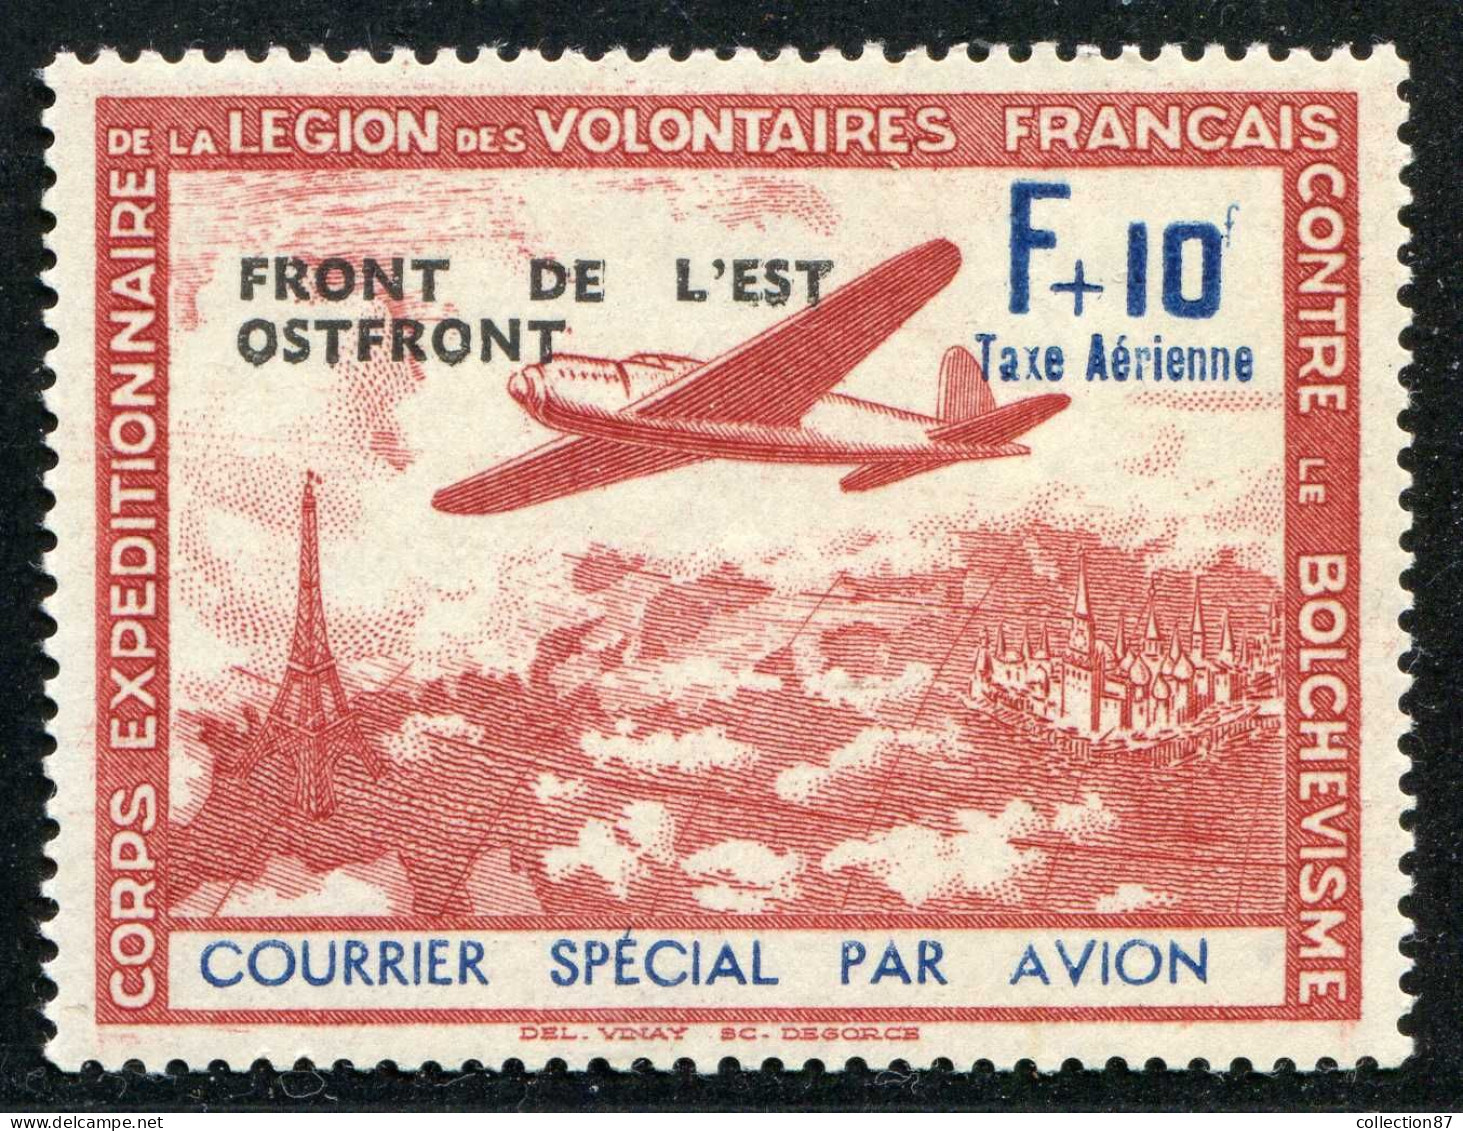 REF093 > FRANCE LVF < Yv N° 5 * Neuf Dos Visible - MH * - Aviation Avion Bombardier - Guerre (timbres De)